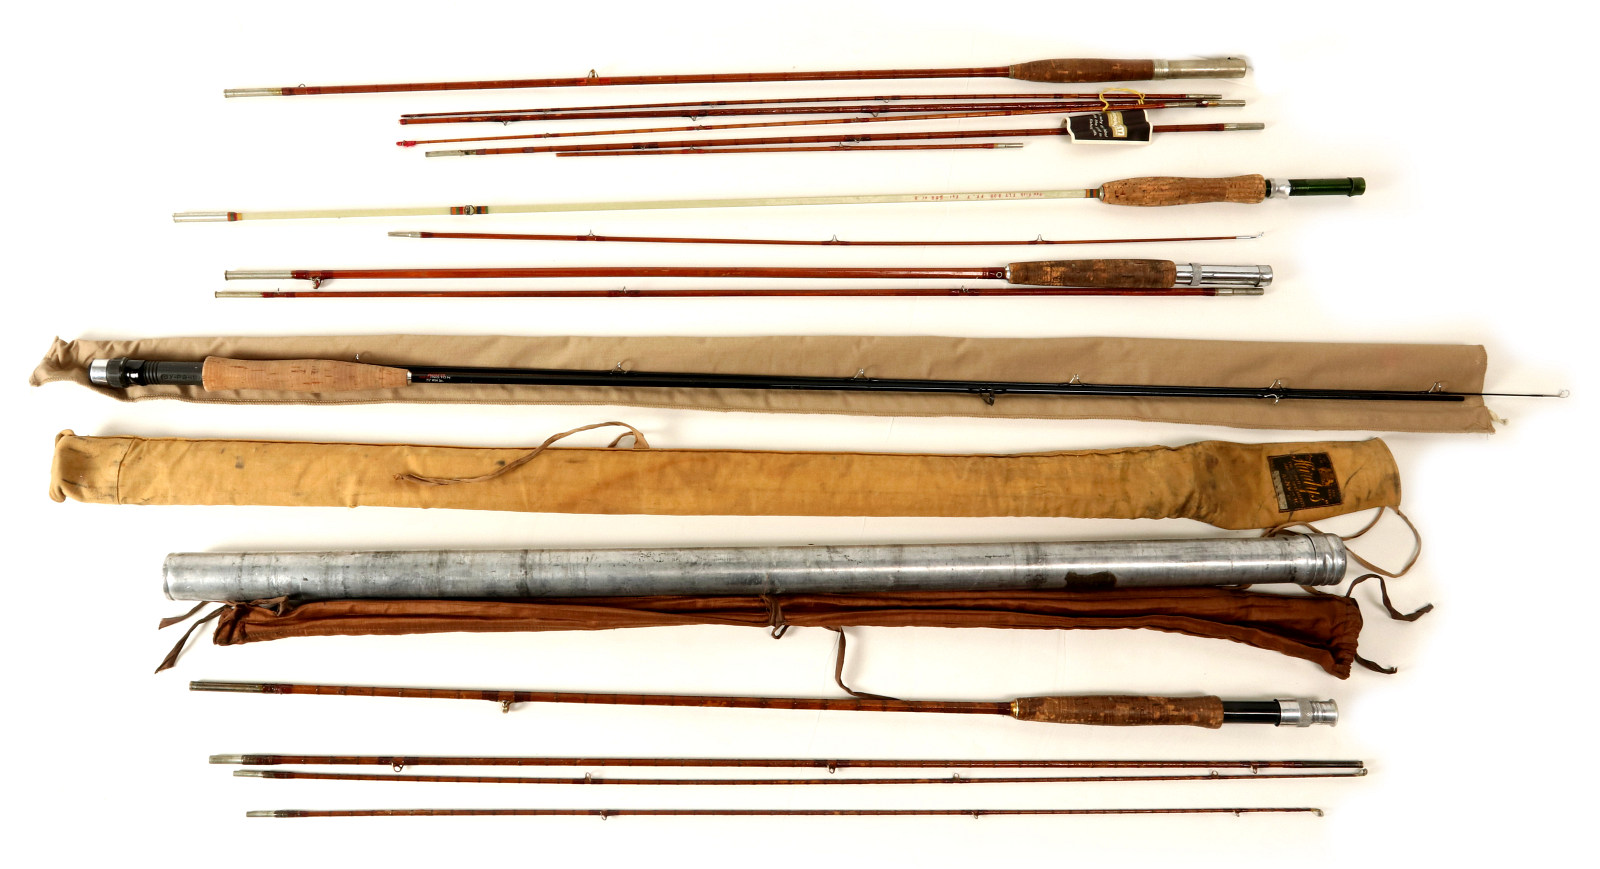 382: A COLLECTION OF ANTIQUE & VINTAGE FLY FISHING RODS